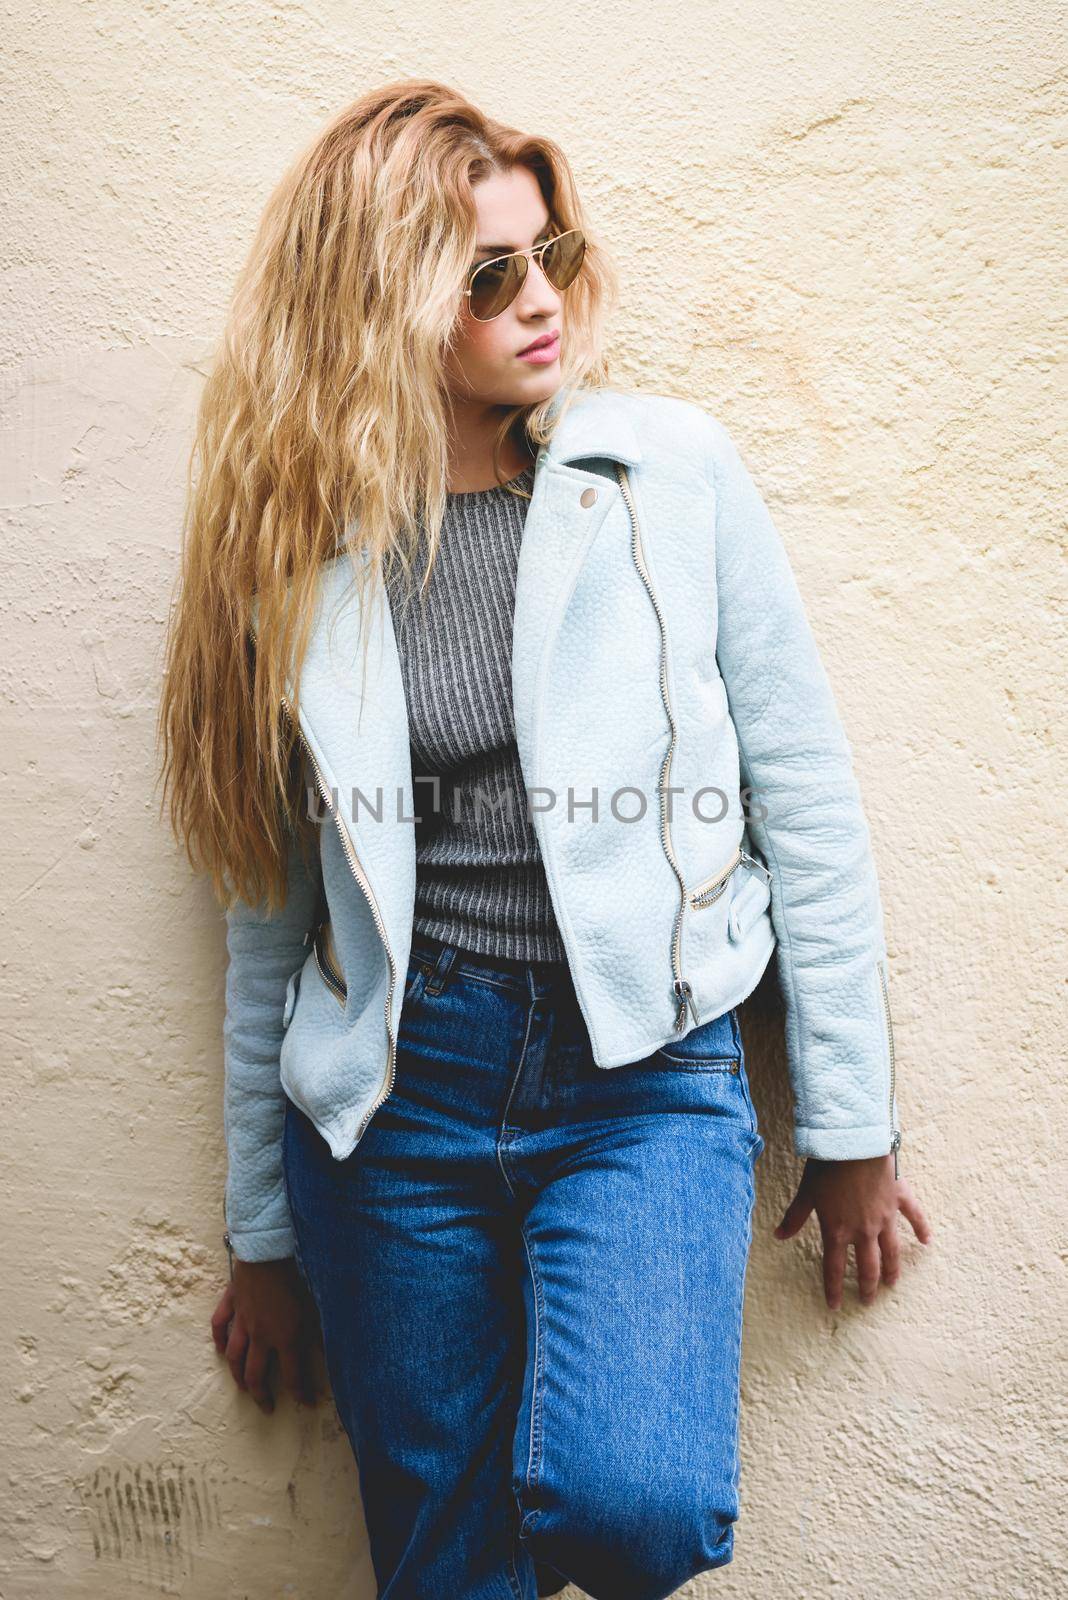 Portrait of beautiful young blonde woman with curly hair. Girl wearing leather jacket, blue jeans and aviator sunglasses in urban background.